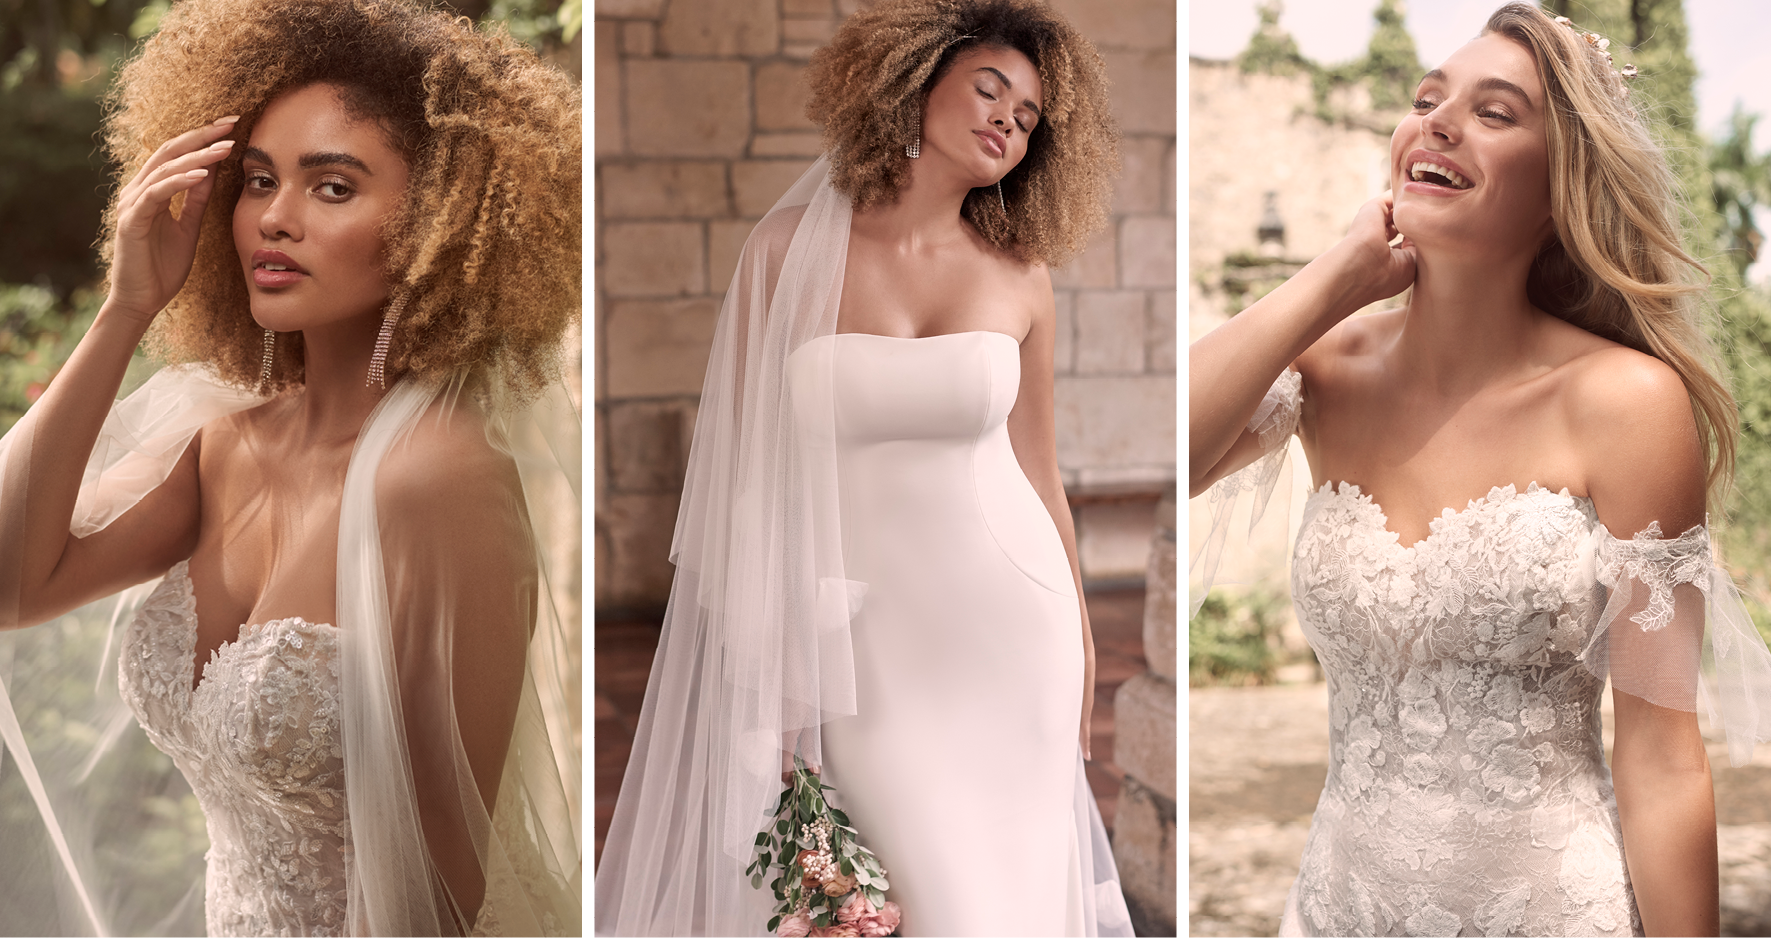 Collage of Brides Wearing Strapless Fit and Flare Wedding Dresses by Maggie Sottero